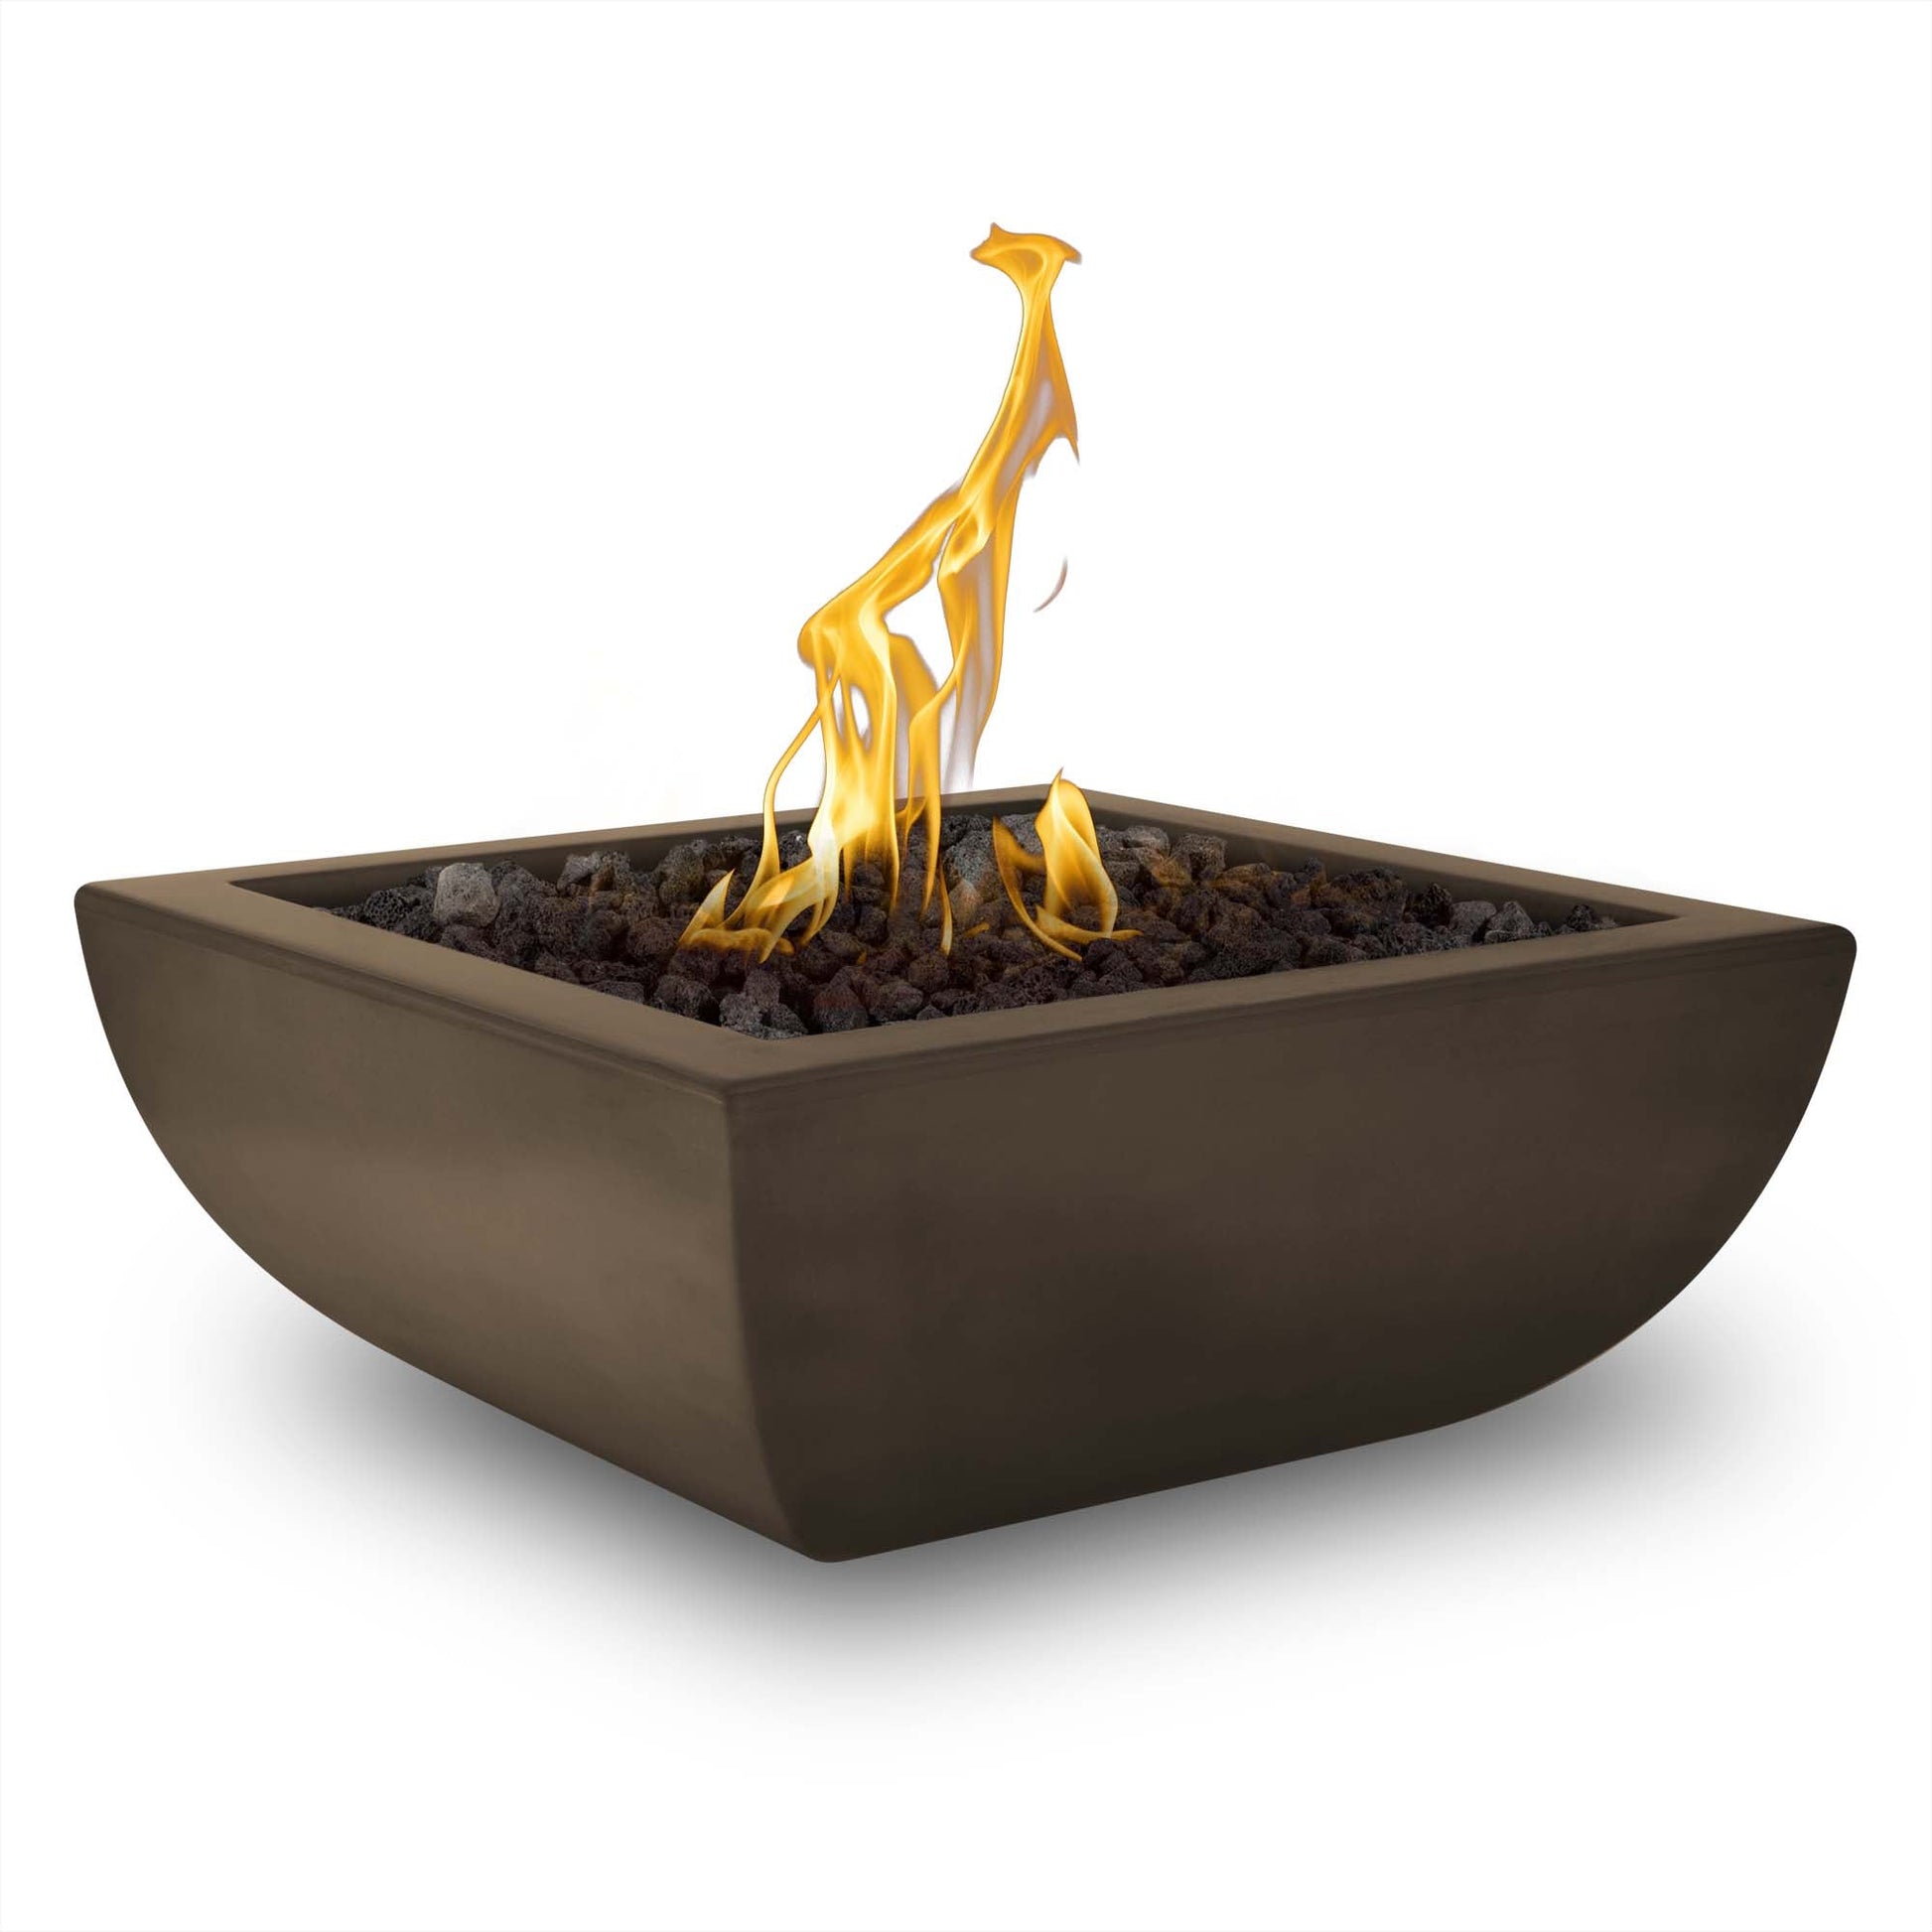 The Outdoor Plus Square Avalon 30" Metallic Silver GFRC Concrete Natural Gas Fire Bowl with Match Lit with Flame Sense Ignition